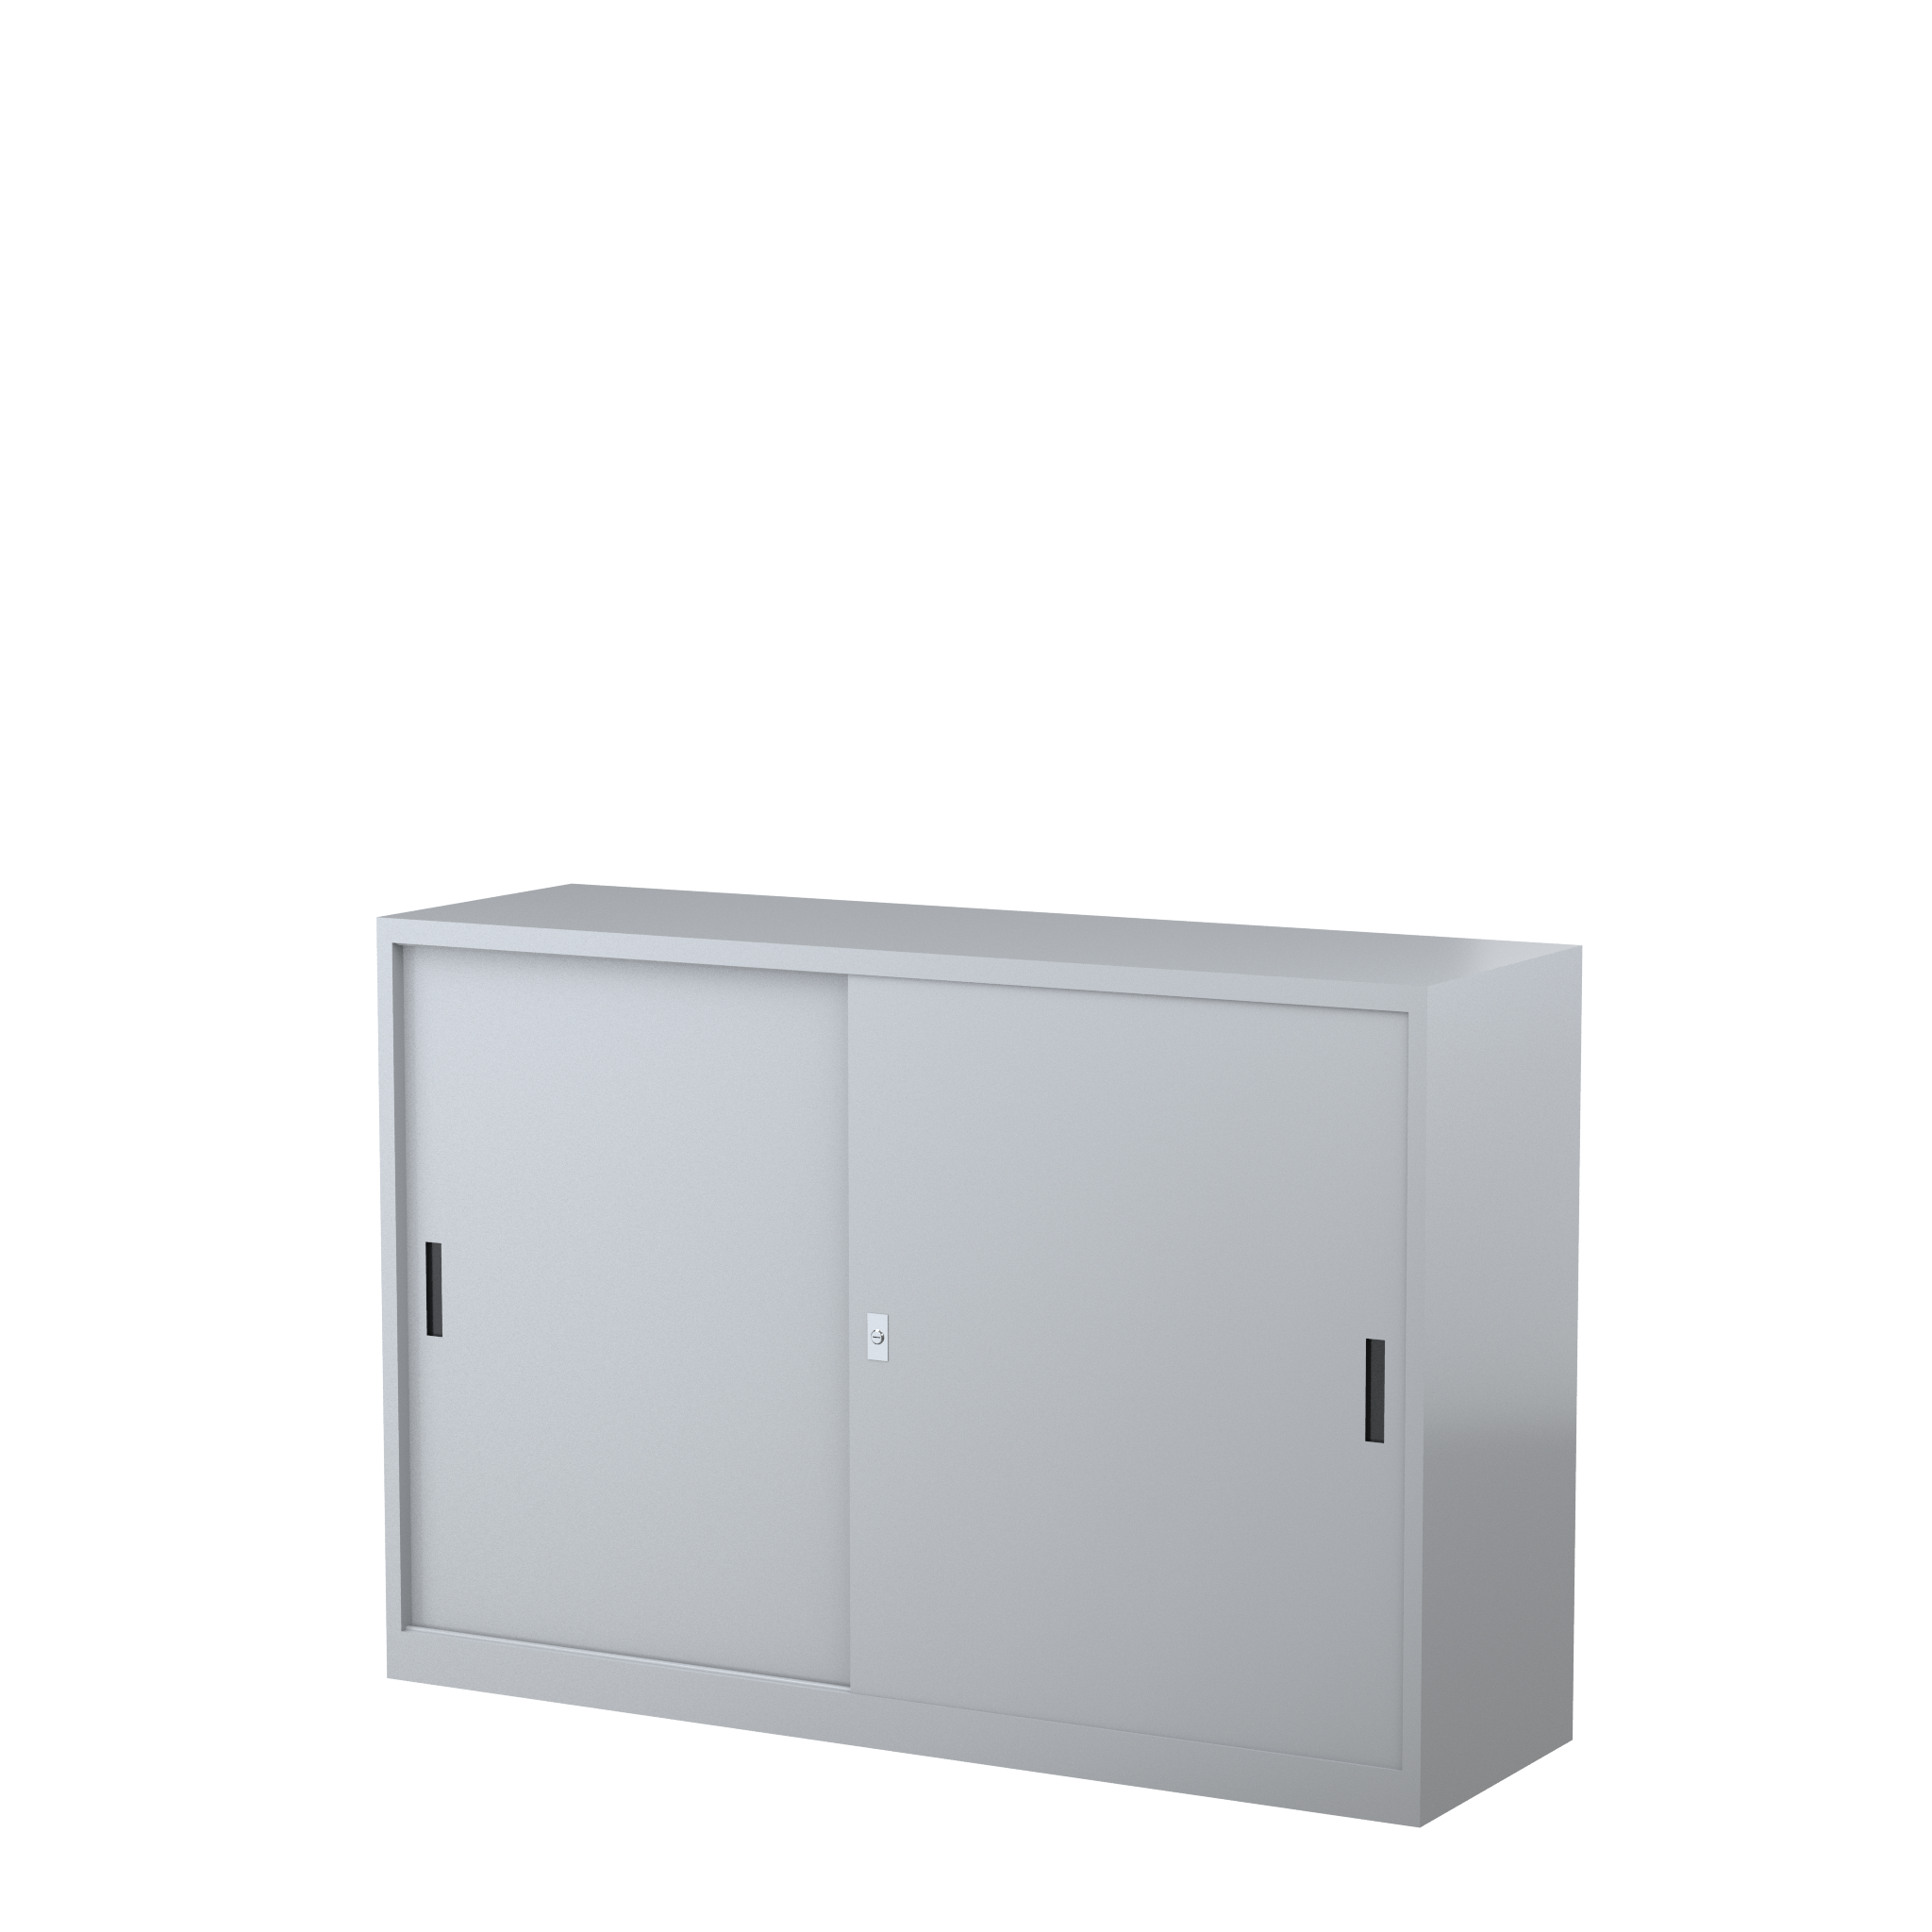 SD1015_1500 - STEELCO SS Cabinet 1015H x 1500W x 465D - 2 Shelves-SG.png